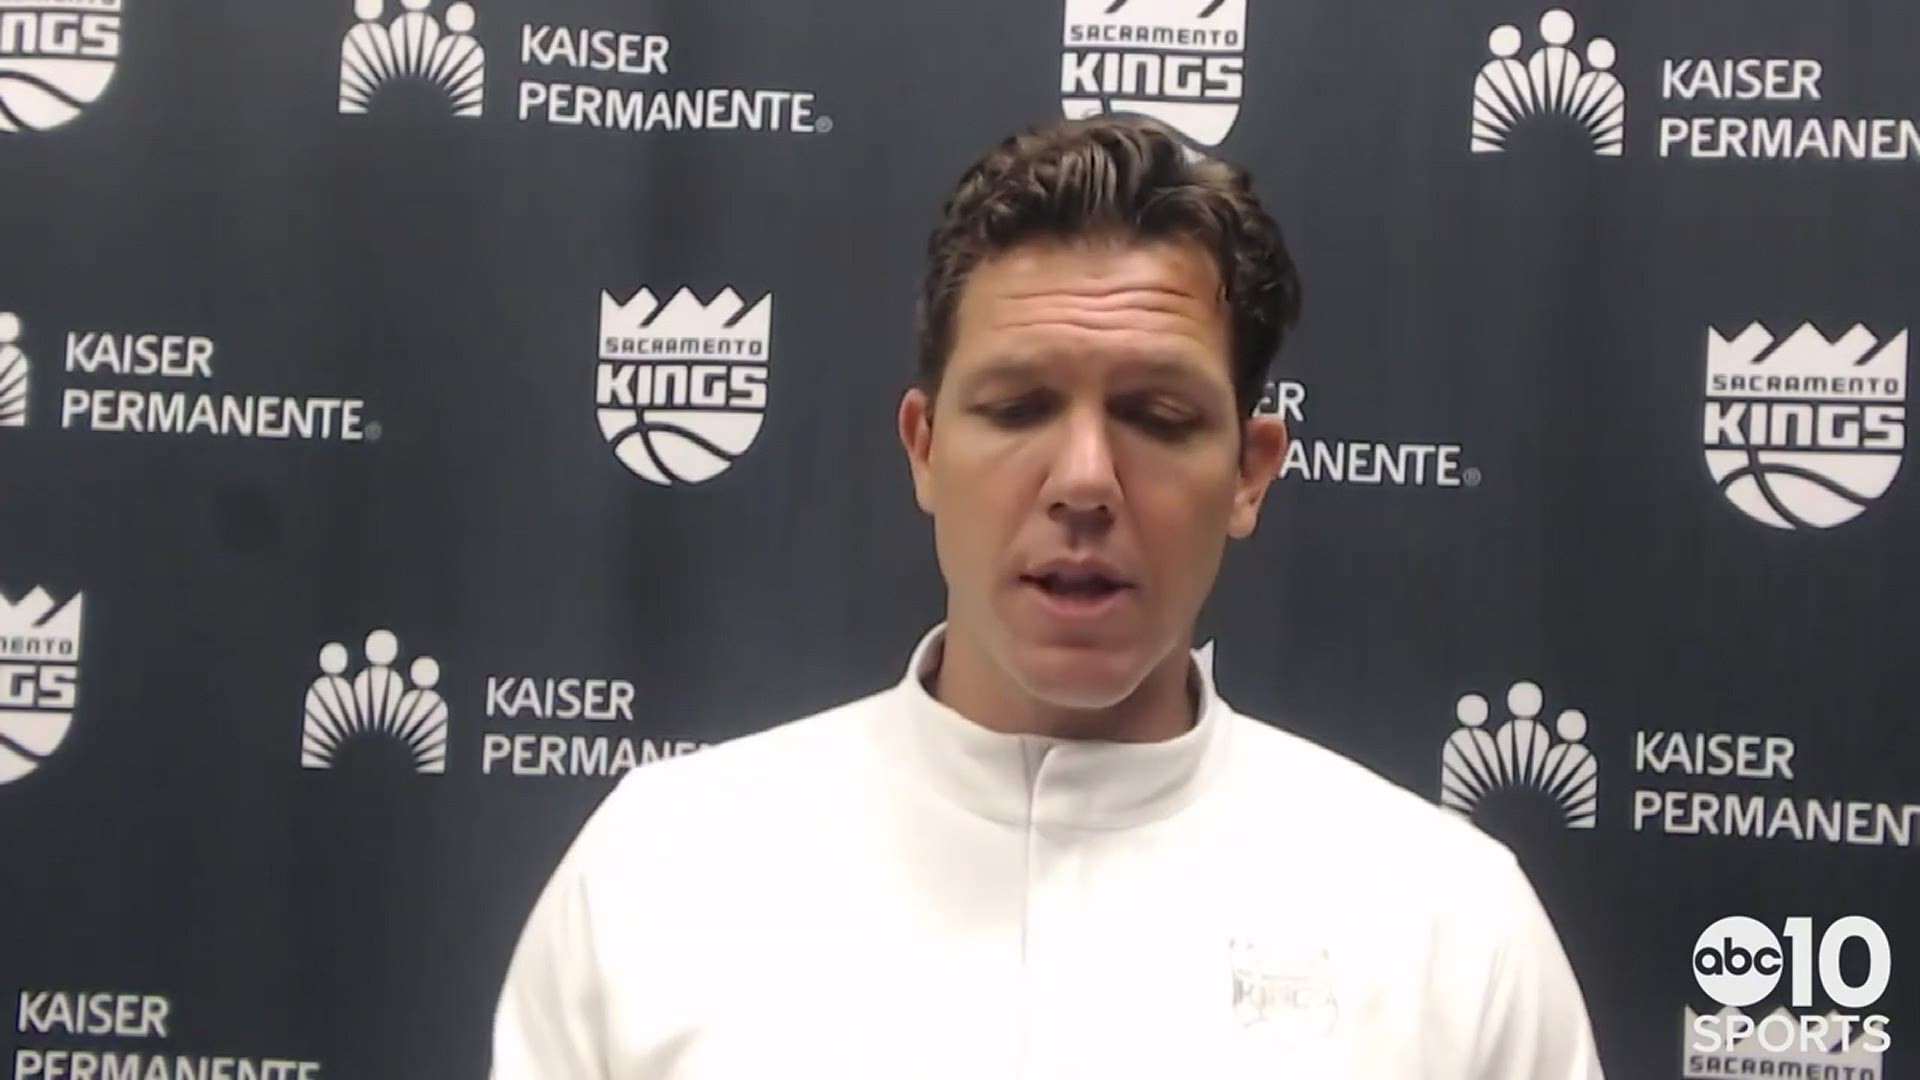 Kings' coach Luke Walton on Sunday's 111-99 victory in Dallas, losing Tyrese Haliburton to injury and the play from Marvin Bagley III in Sacramento's win.